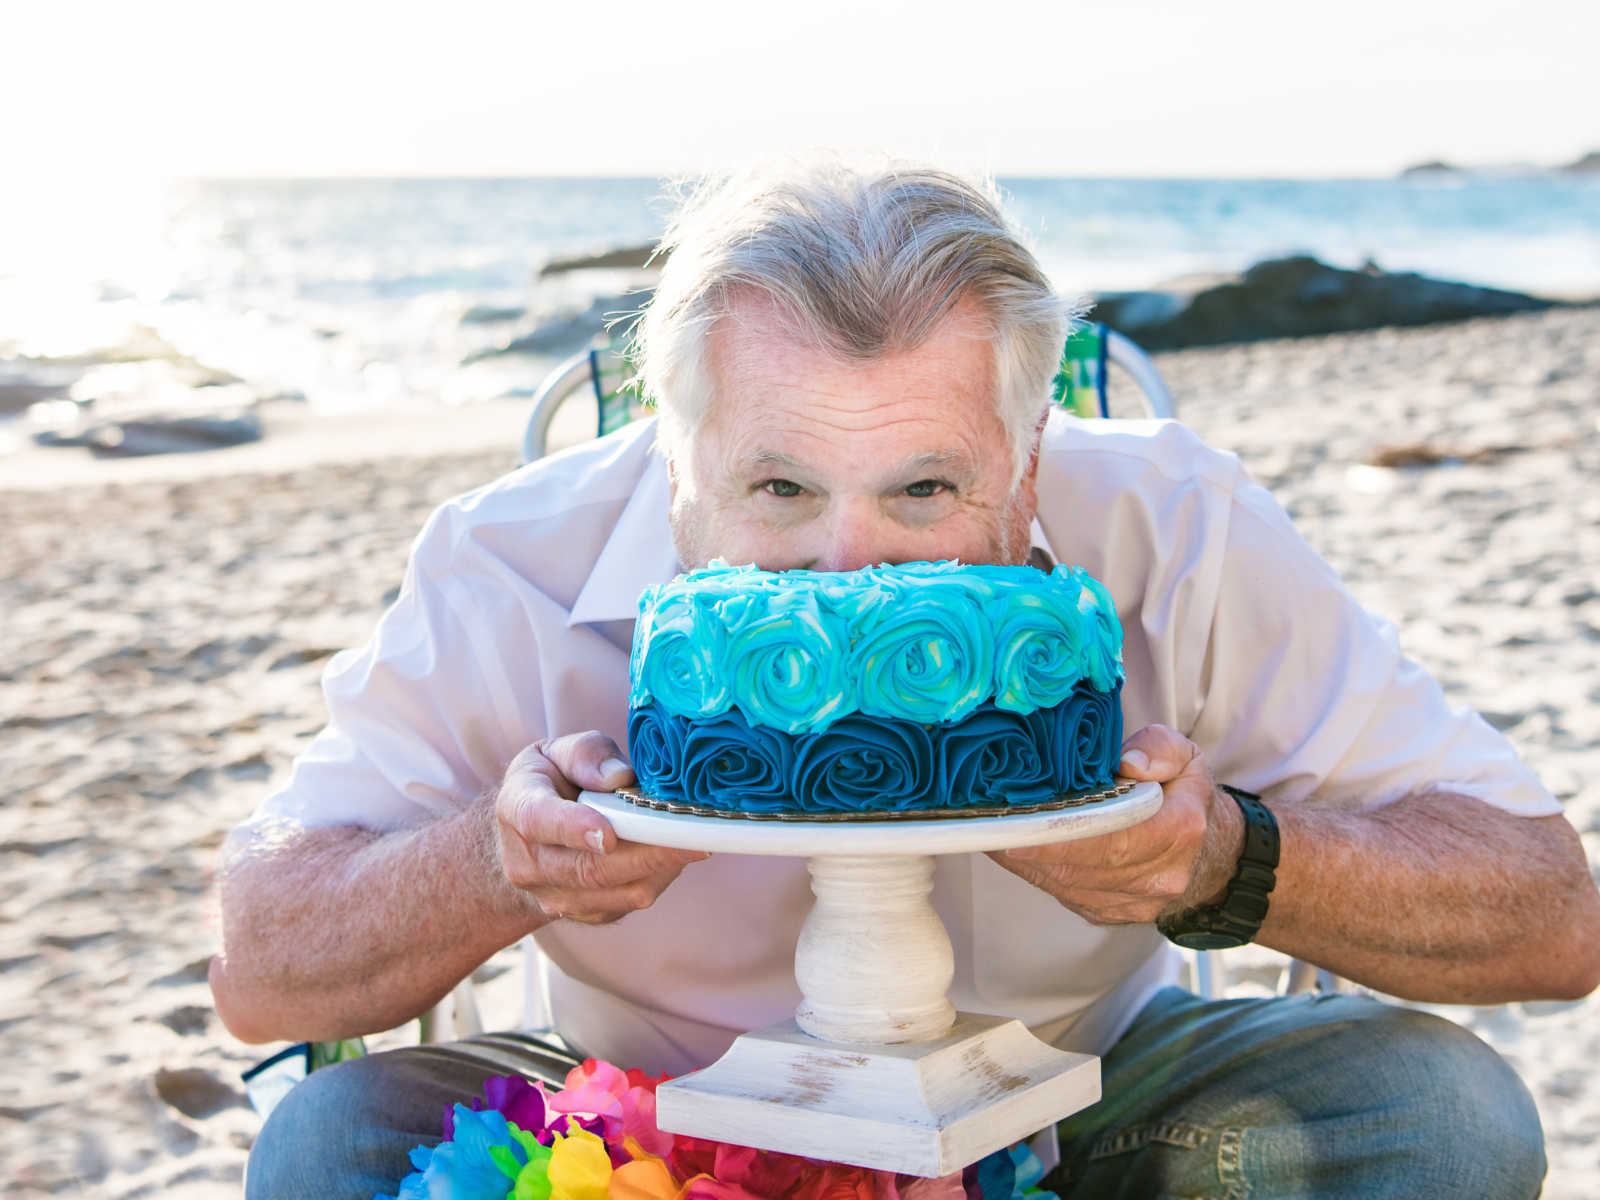 man shoving his face into his birthday cake on the beach